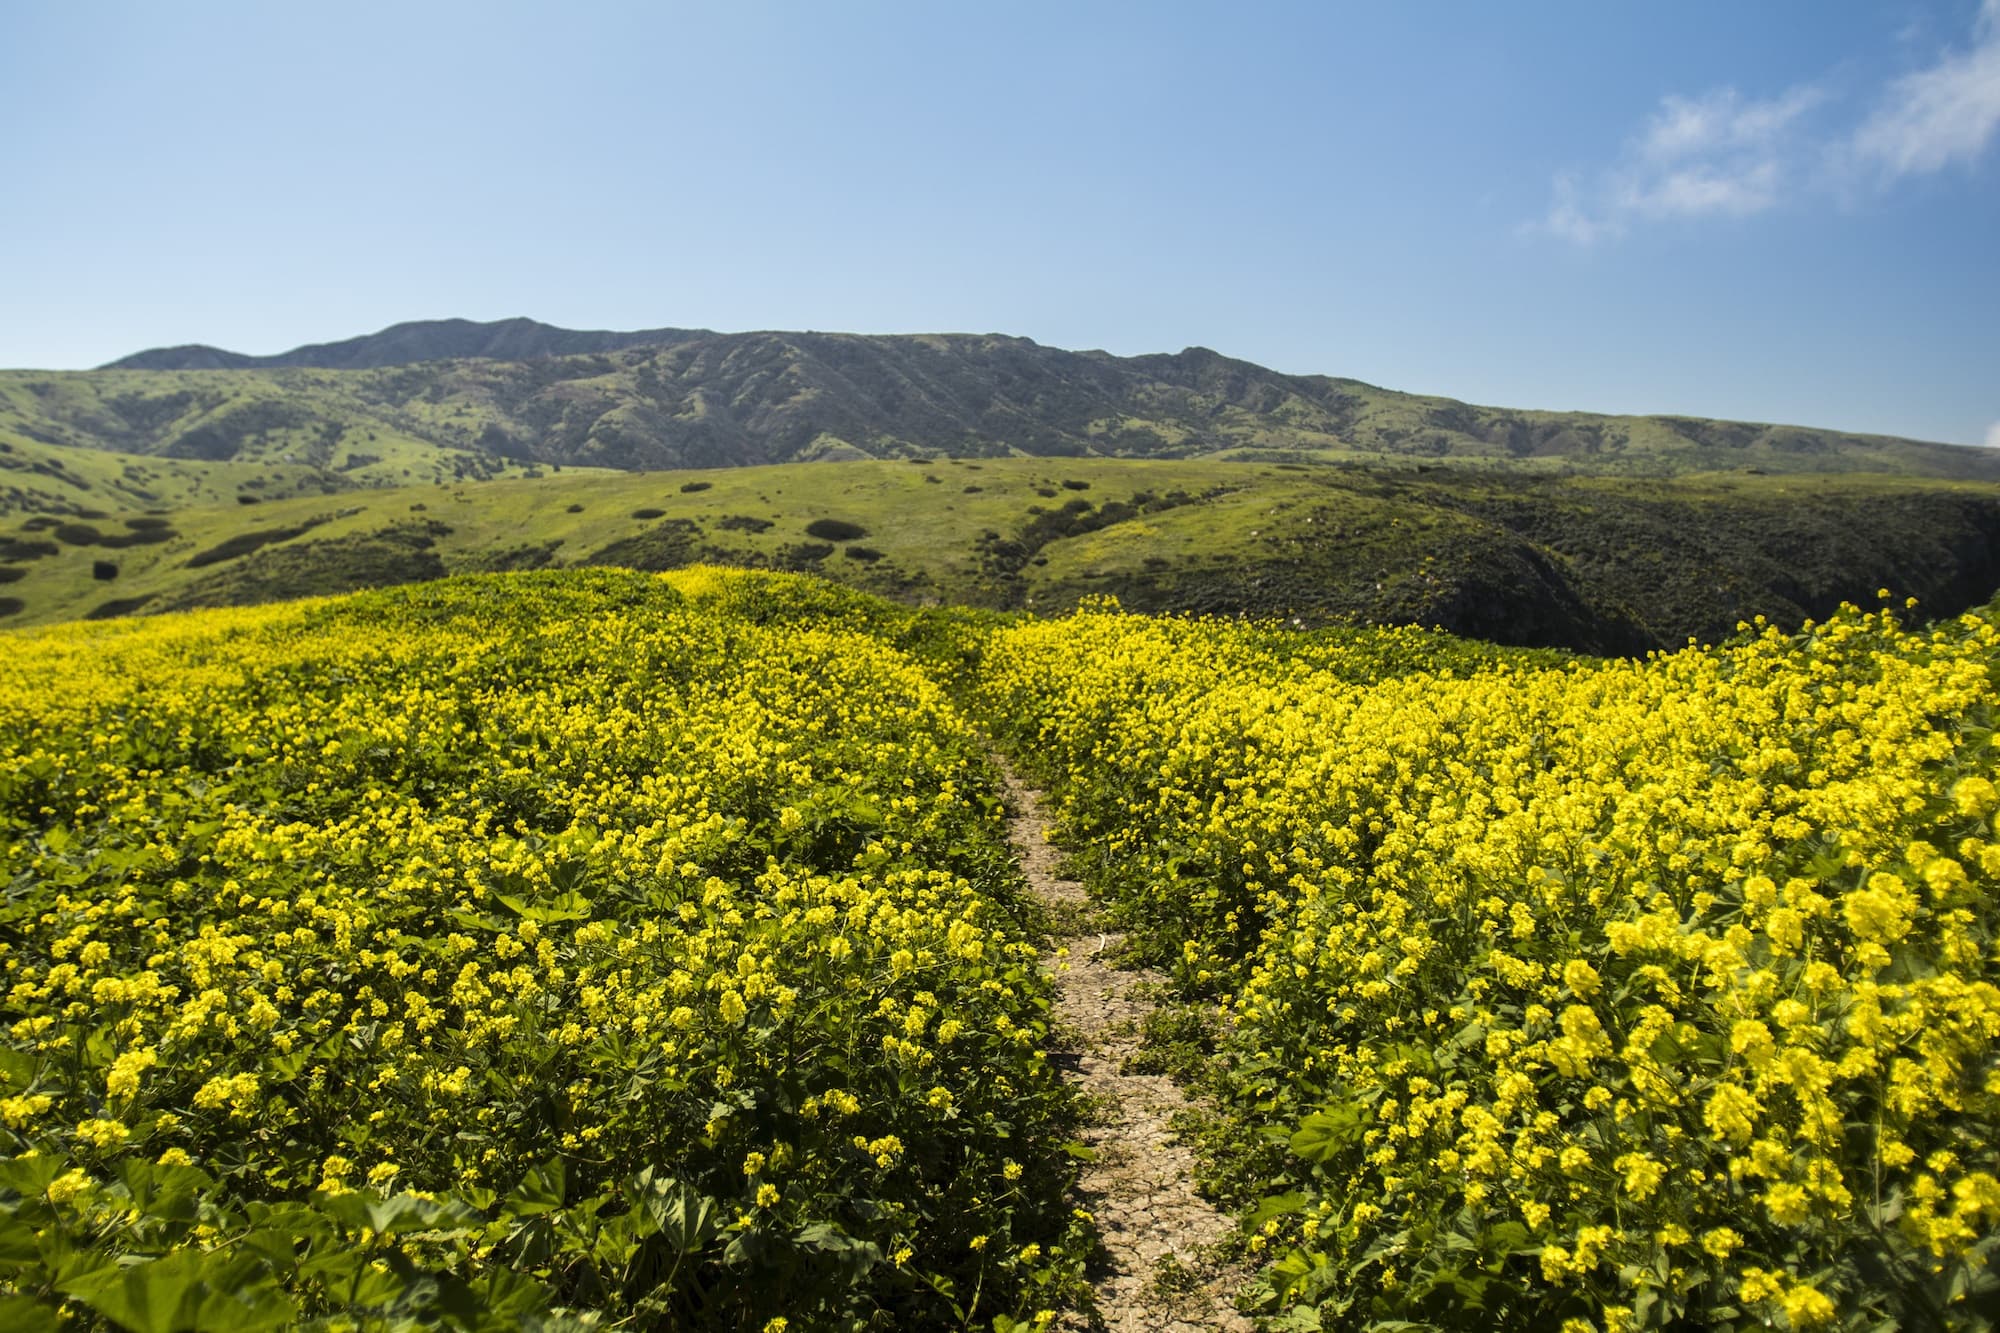 Channel Islands National Park in spring // Plan your visit to Channel Islands National Park with this guide including things to do, when to go, what to pack, info on camping, and more.